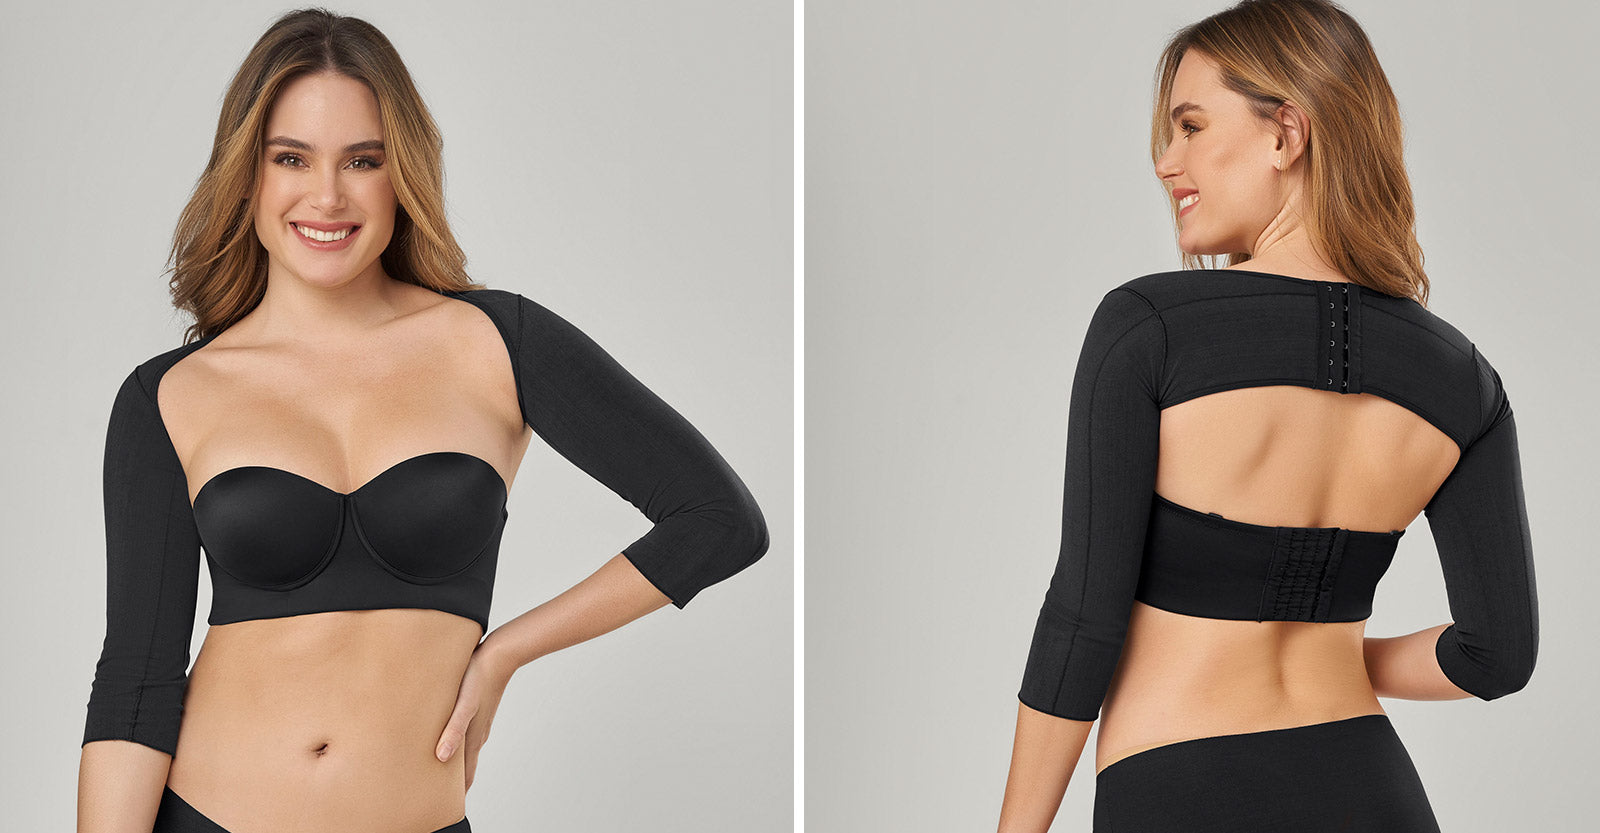 Do Arm Shaper Sleeves Work? We Set the Record Straight